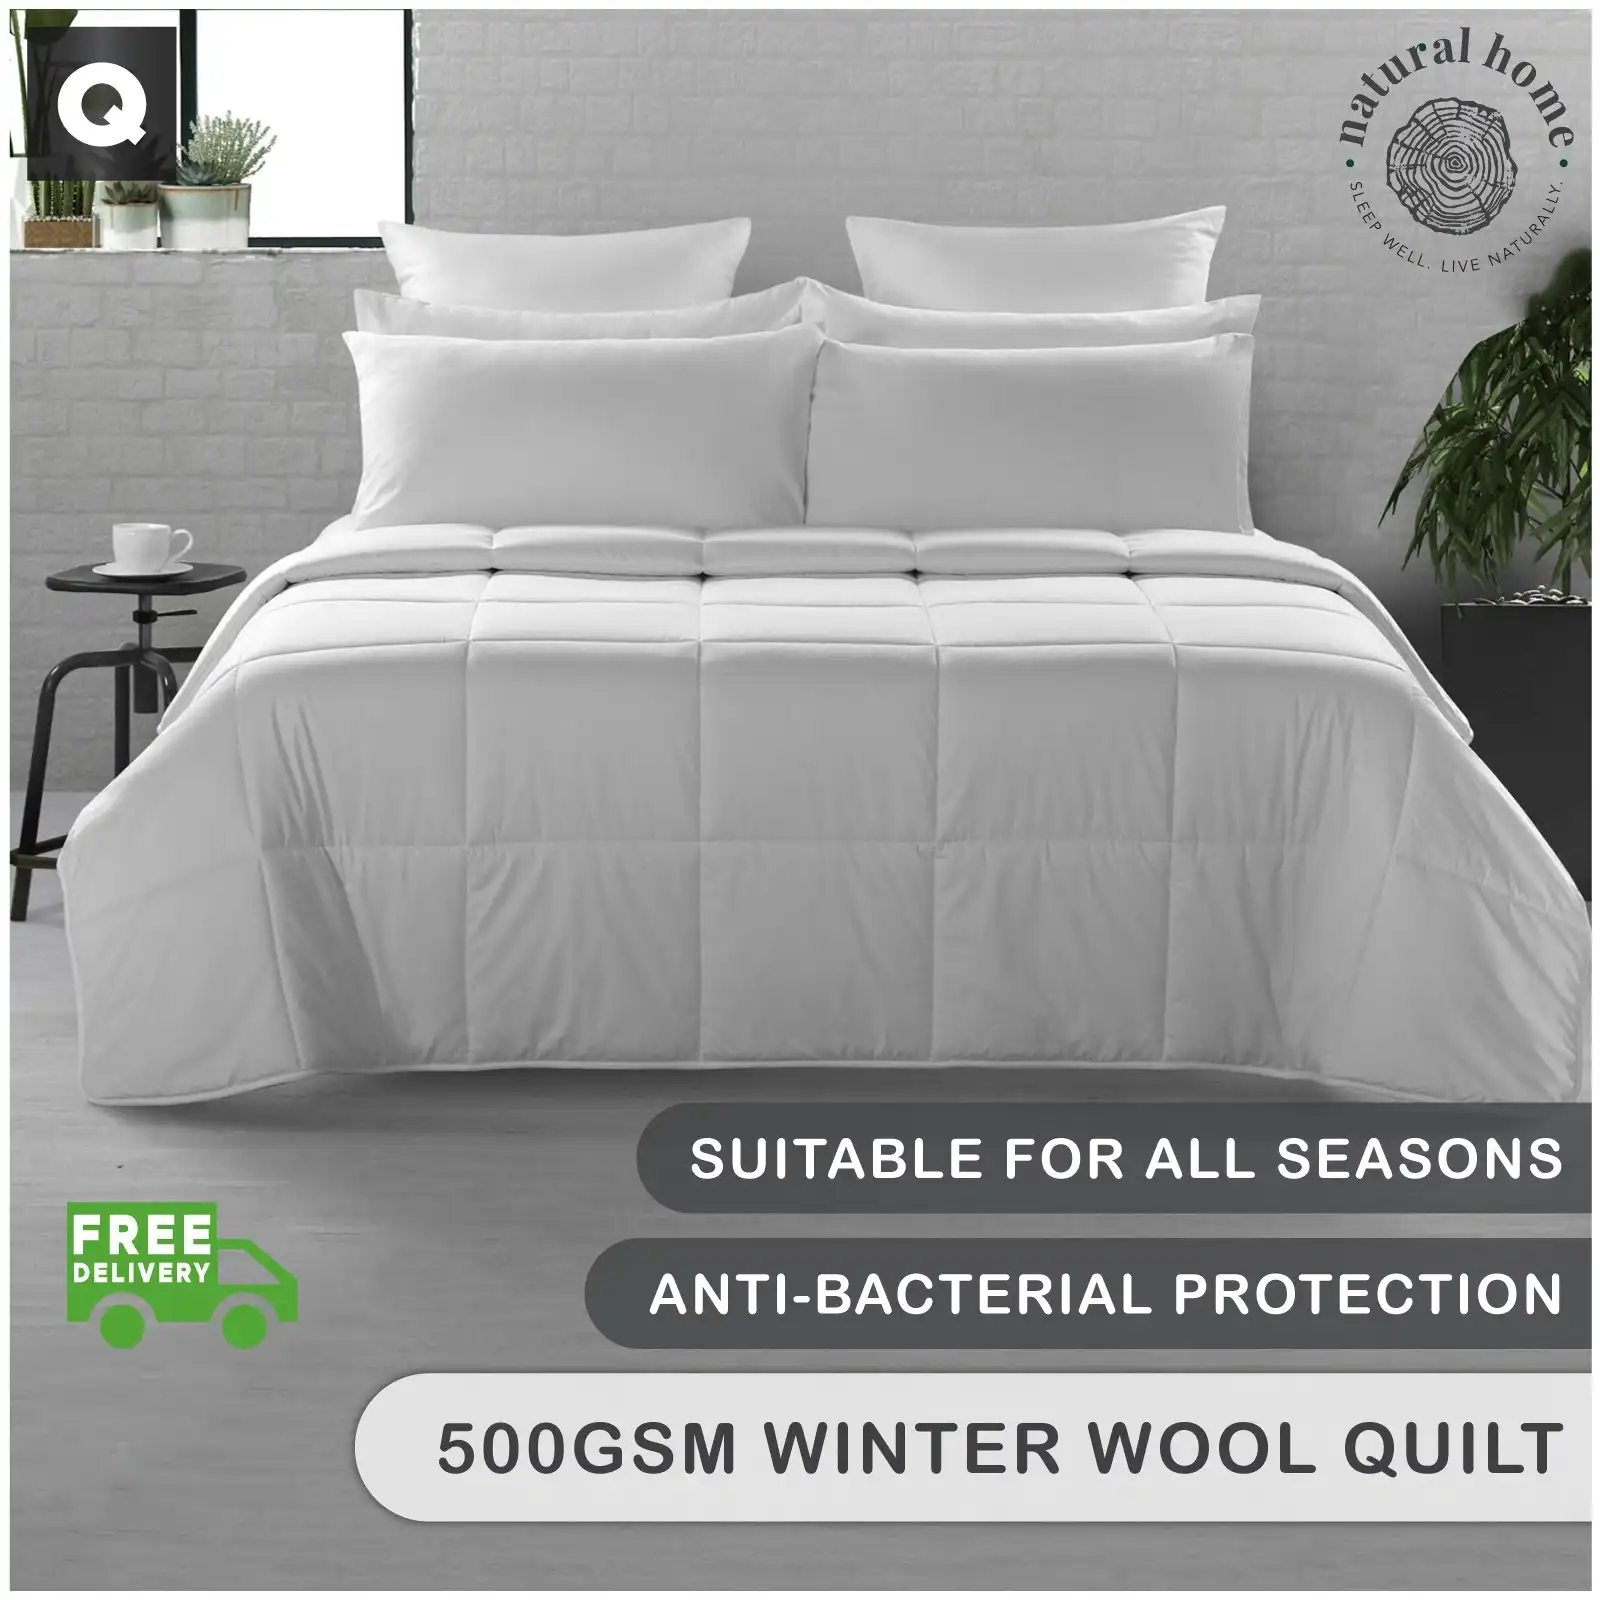 Natural Home Winter Wool Quilt 500gsm - White - Queen Bed